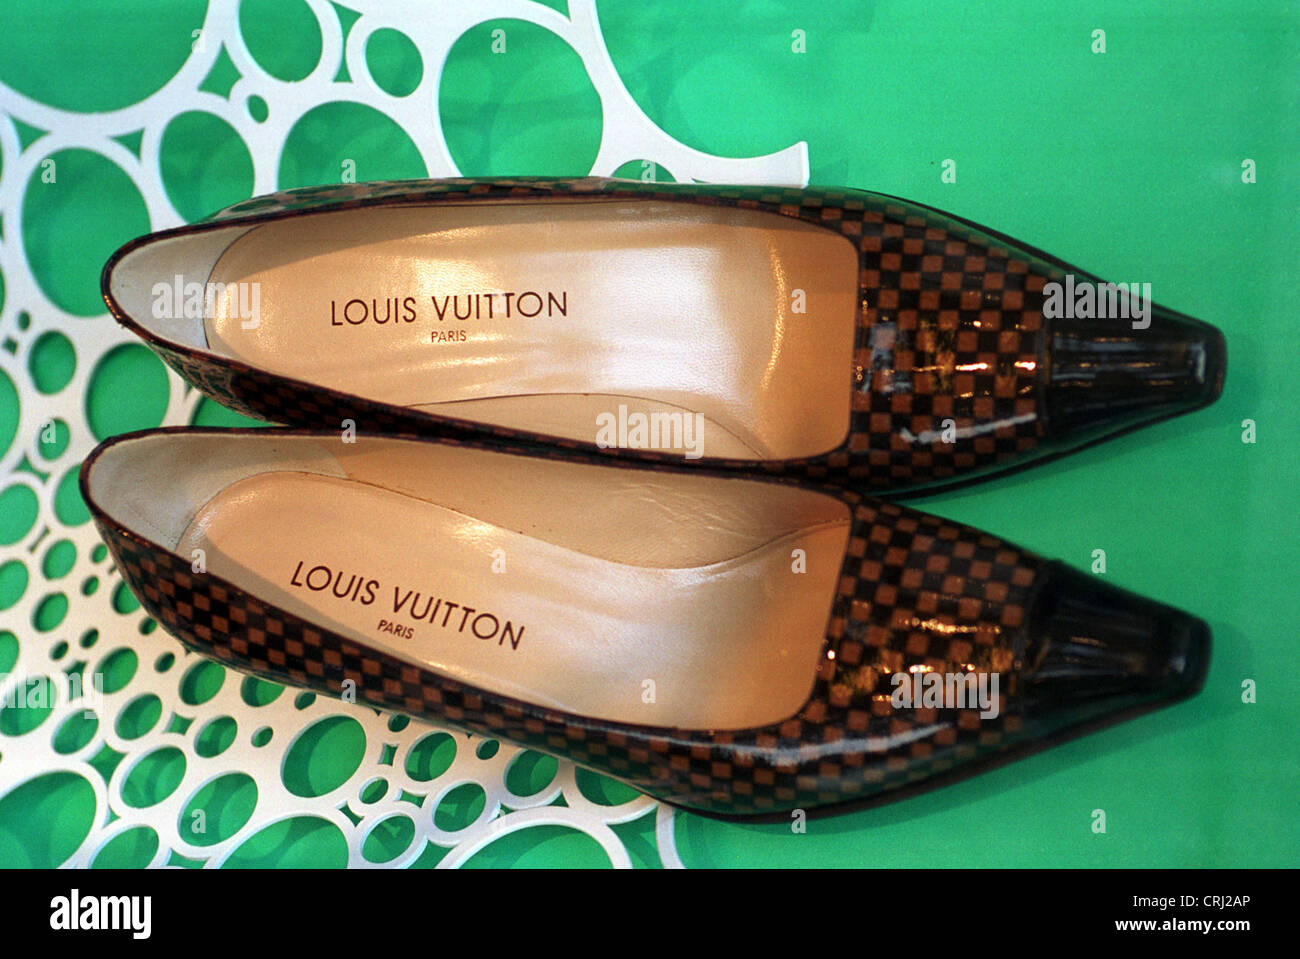 Berlin, the luxury brand Louis Vuitton Shoes Stock Photo - Alamy